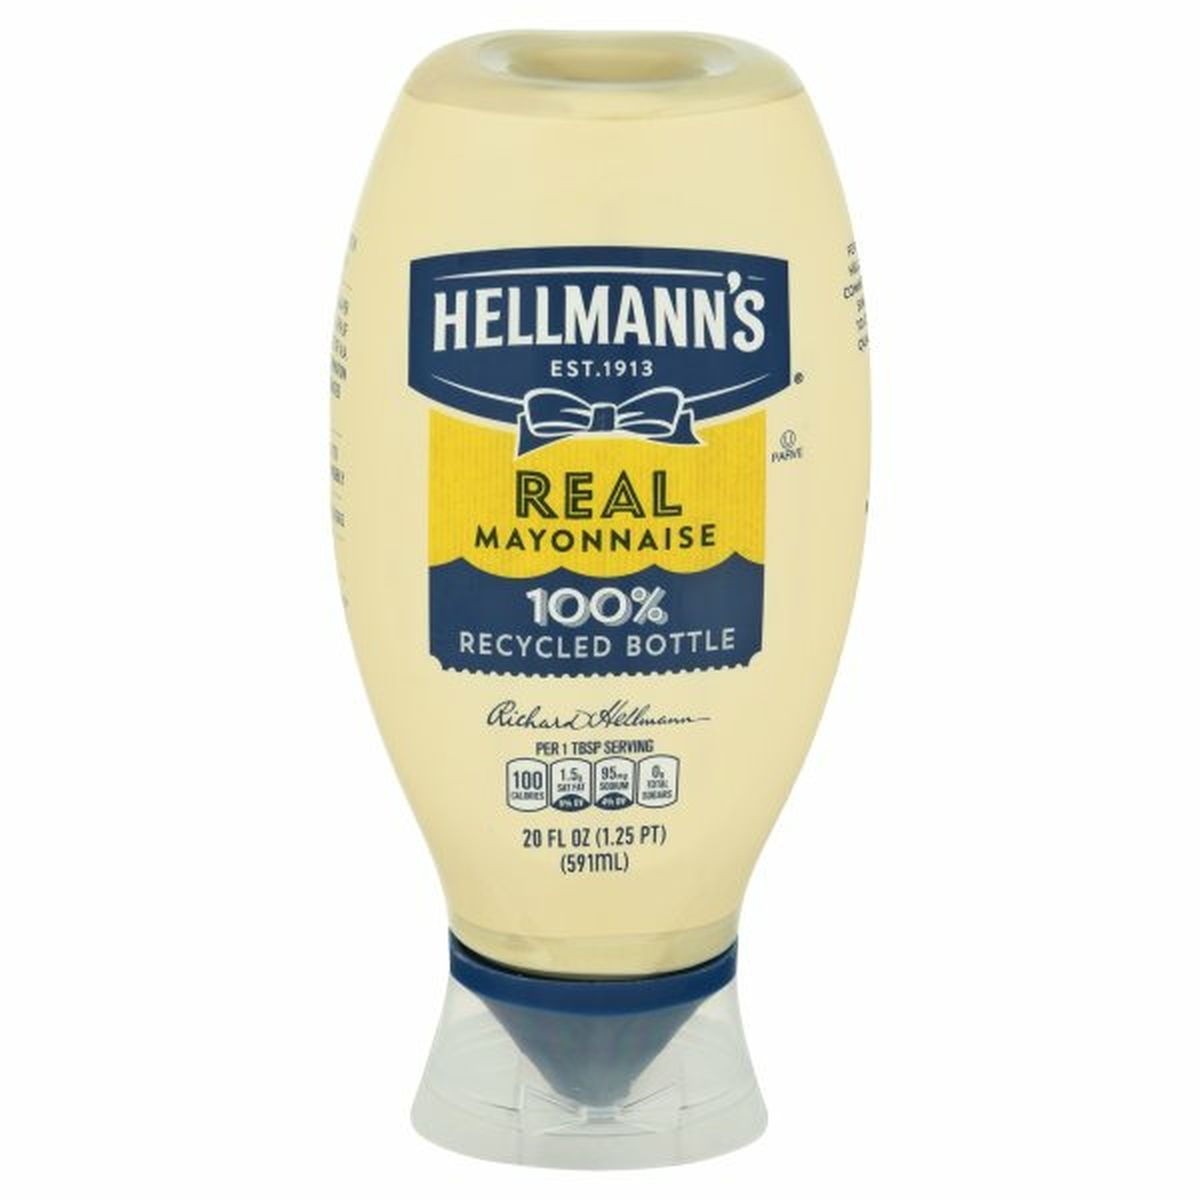 Calories in Hellmann's Real Mayonnaise